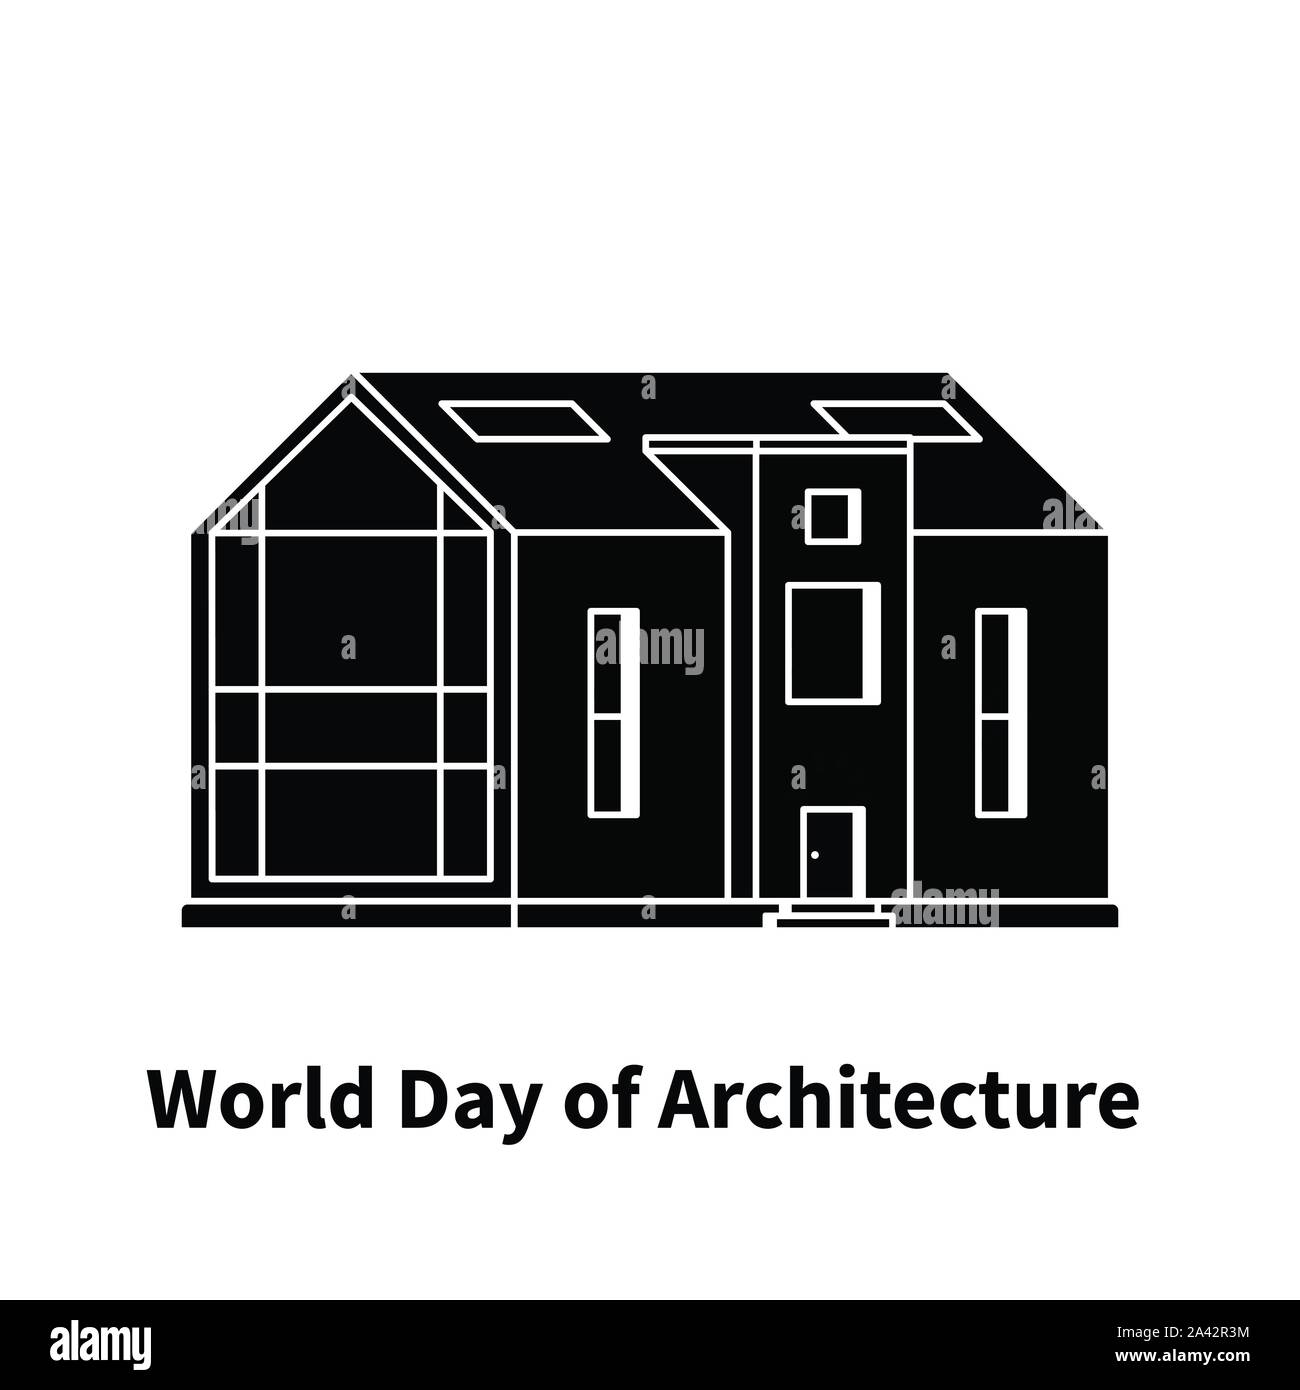 Silhouette of modern house with text world day of architecture on a white background Stock Vector